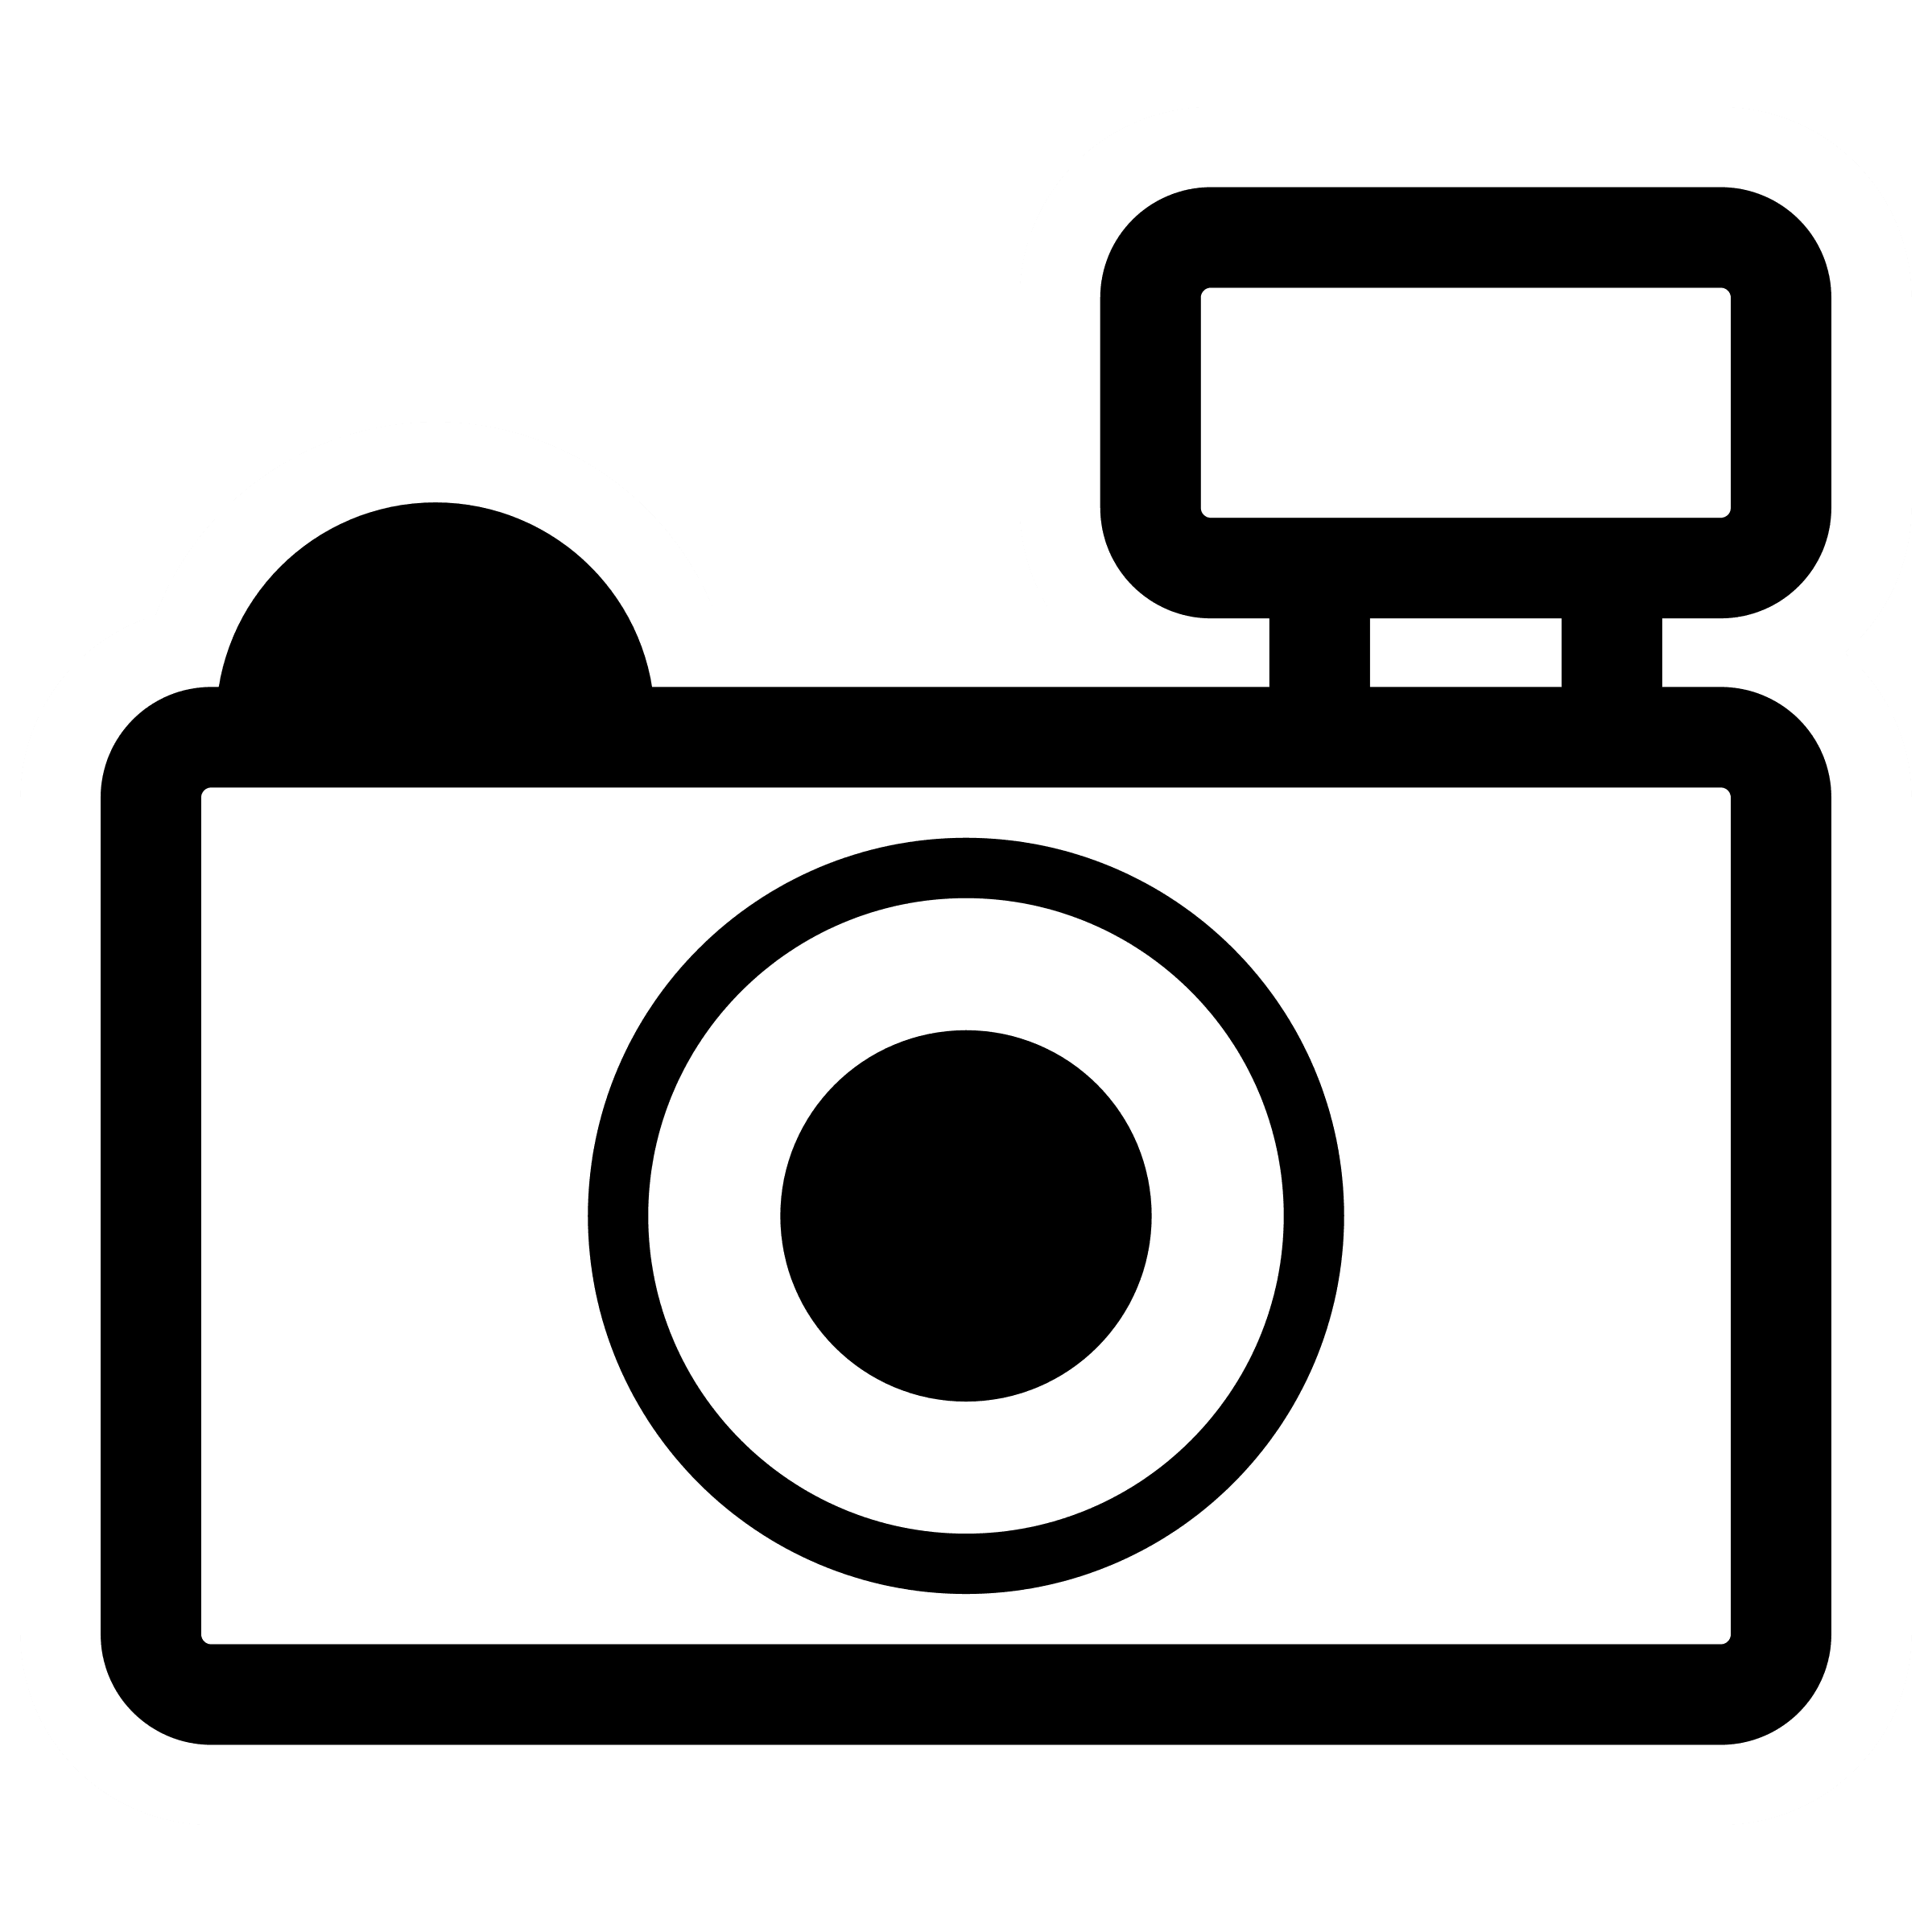 Camera clip art heart. With free clipart images